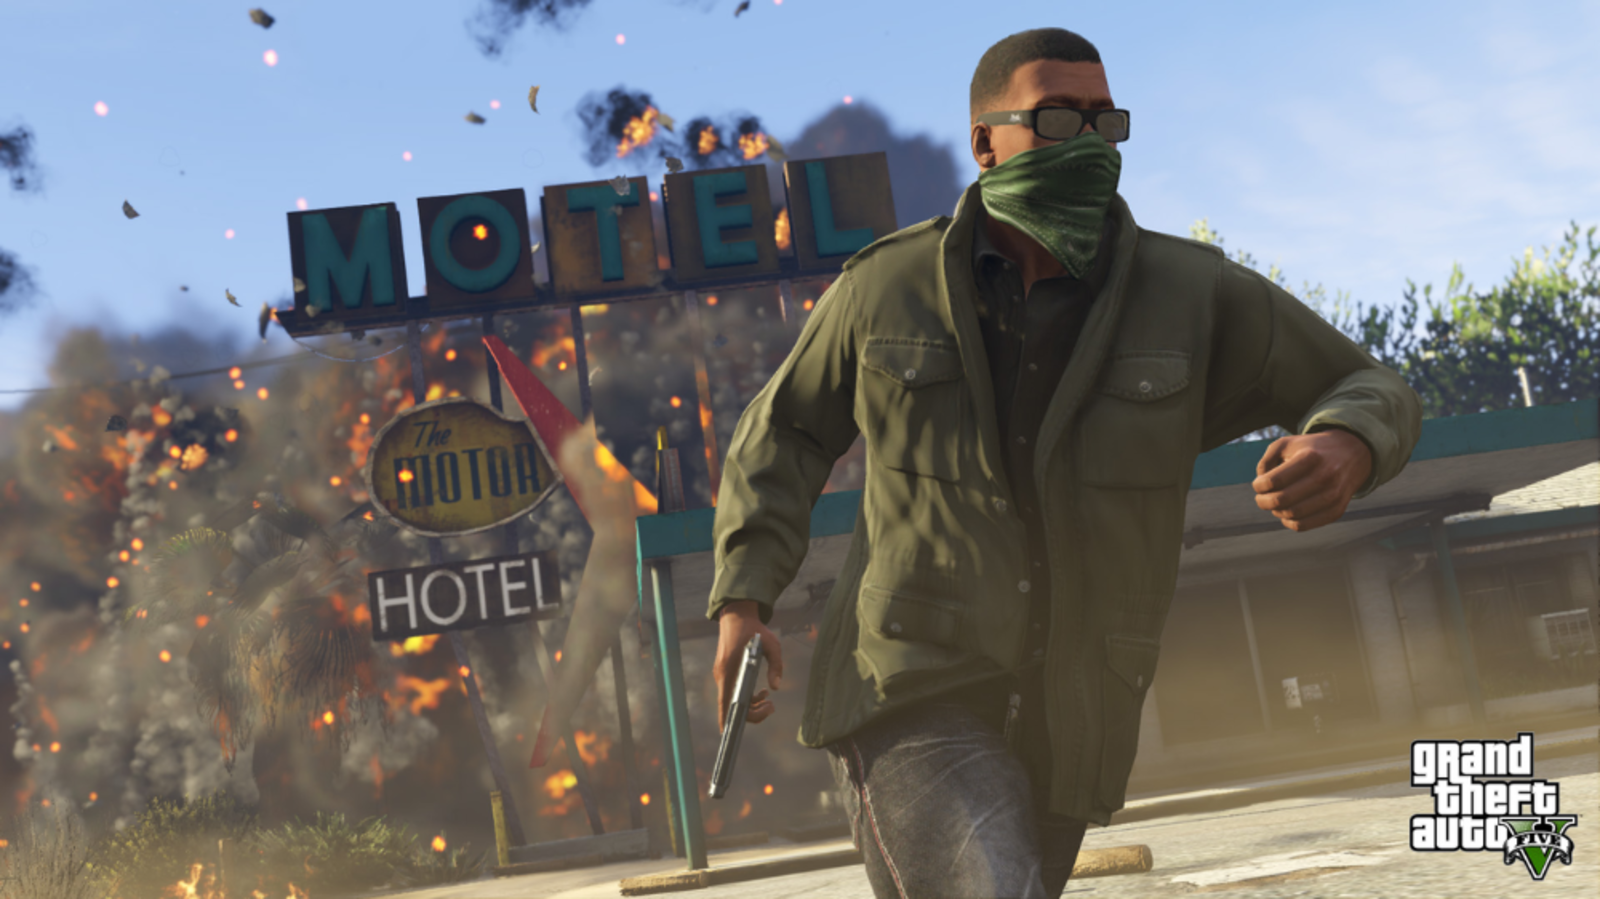 GTA 6 release date likely to be announced soon: Here's what to expect